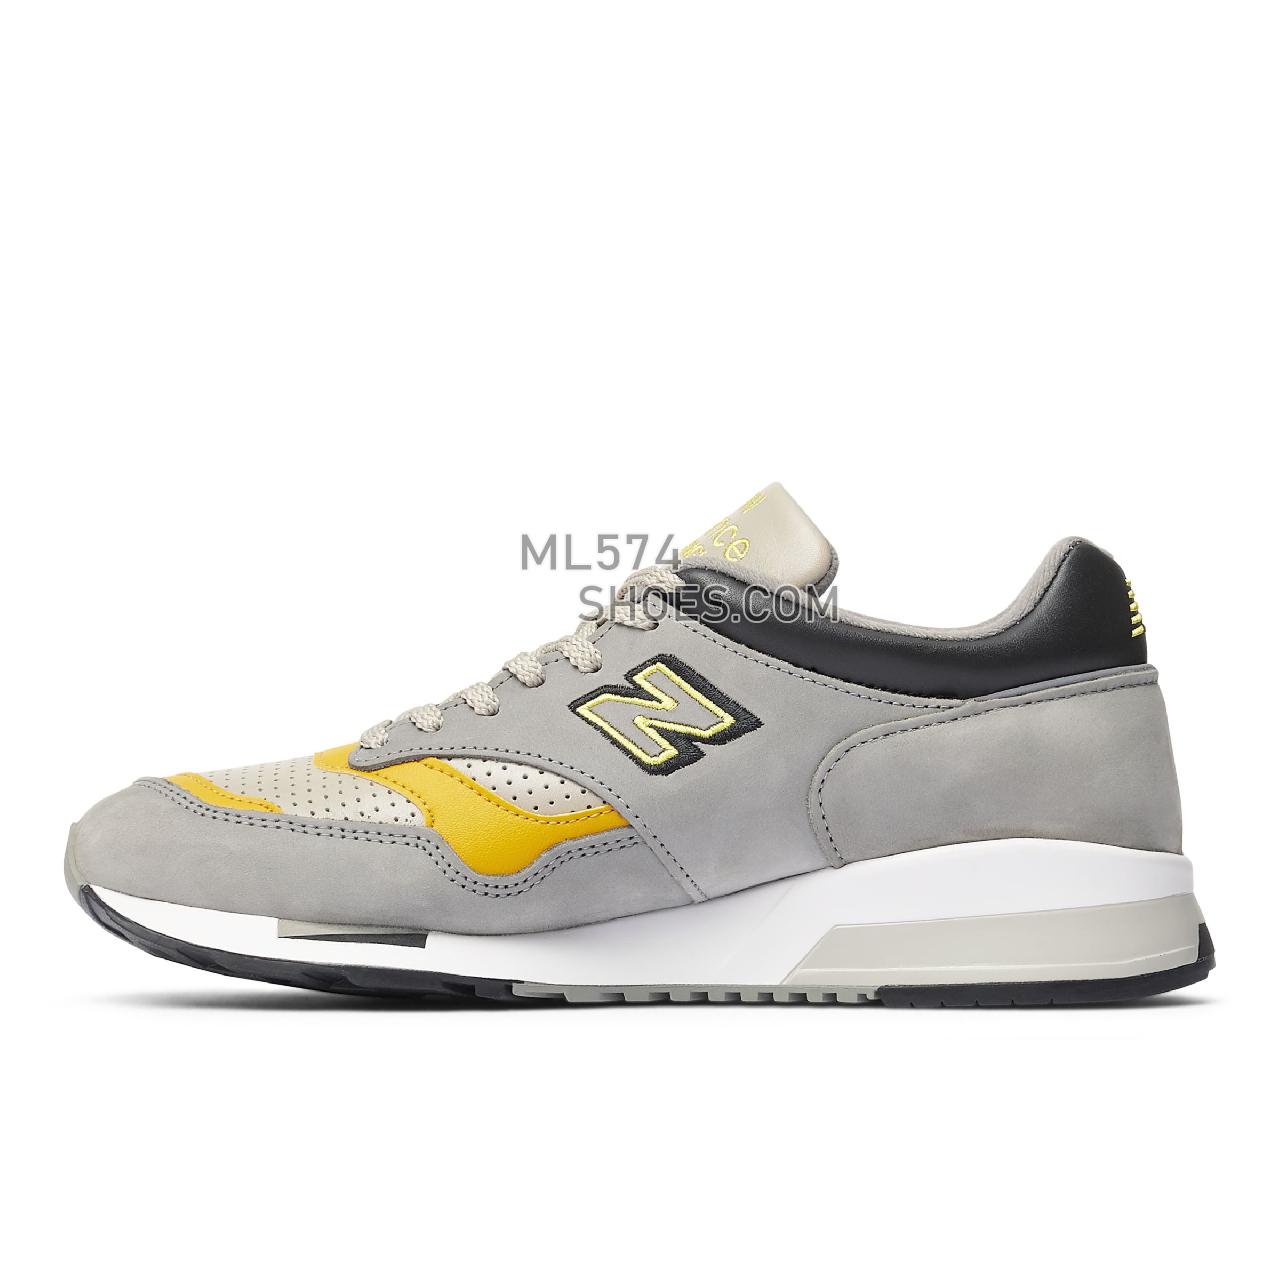 New Balance MADE in UK 1500 - Men's Made in USA And UK Sneakers - Grey with Yellow - M1500GGY